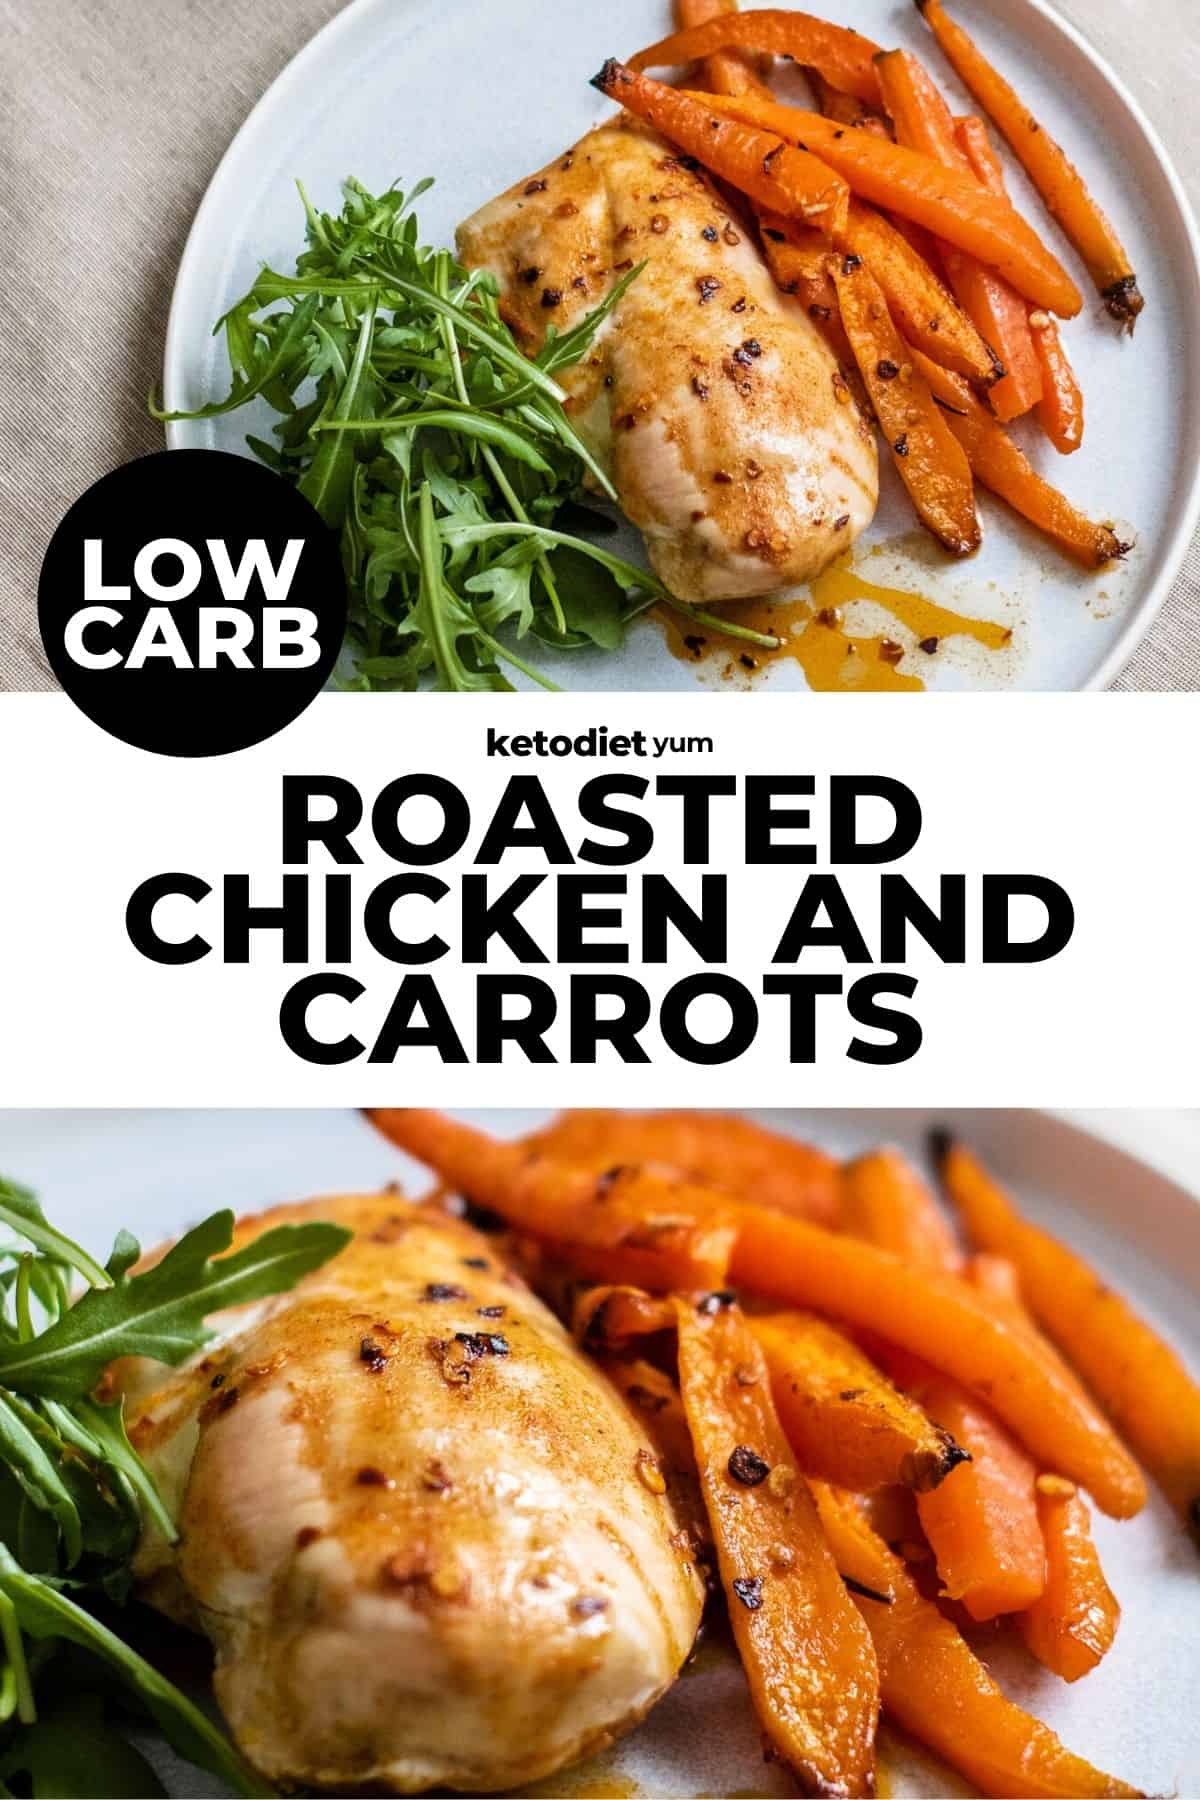 Best Keto Roasted Chicken and Carrots Recipe